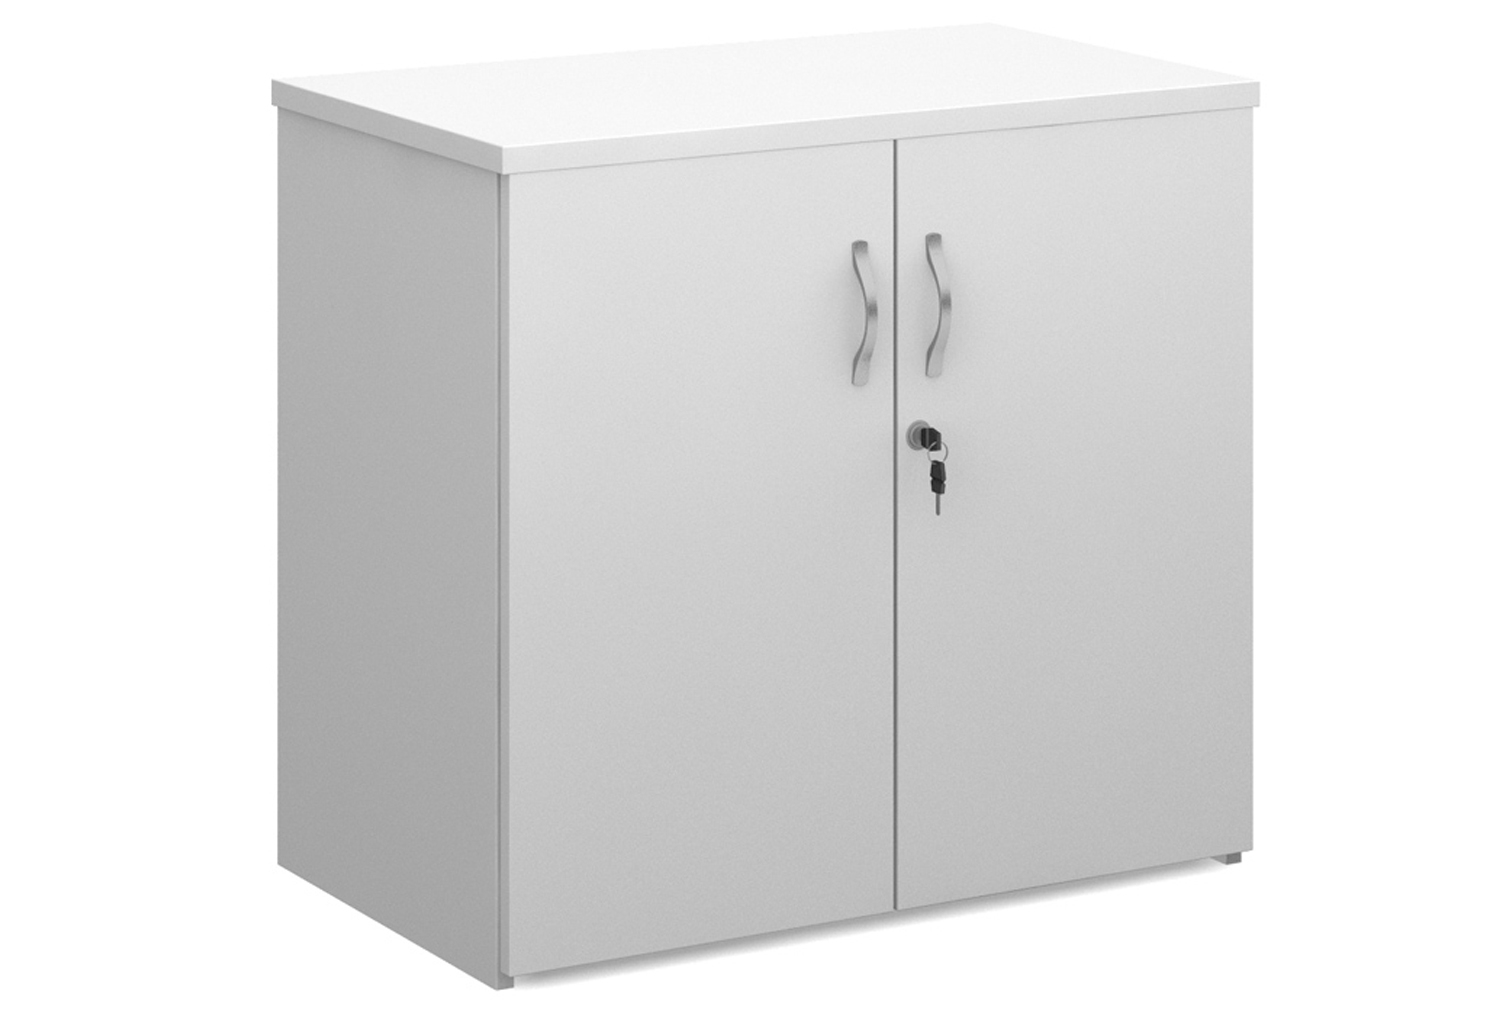 Strive Home Office Duo Double Door Cupboard, 1 Shelf, 74h (cm), White, Express Delivery